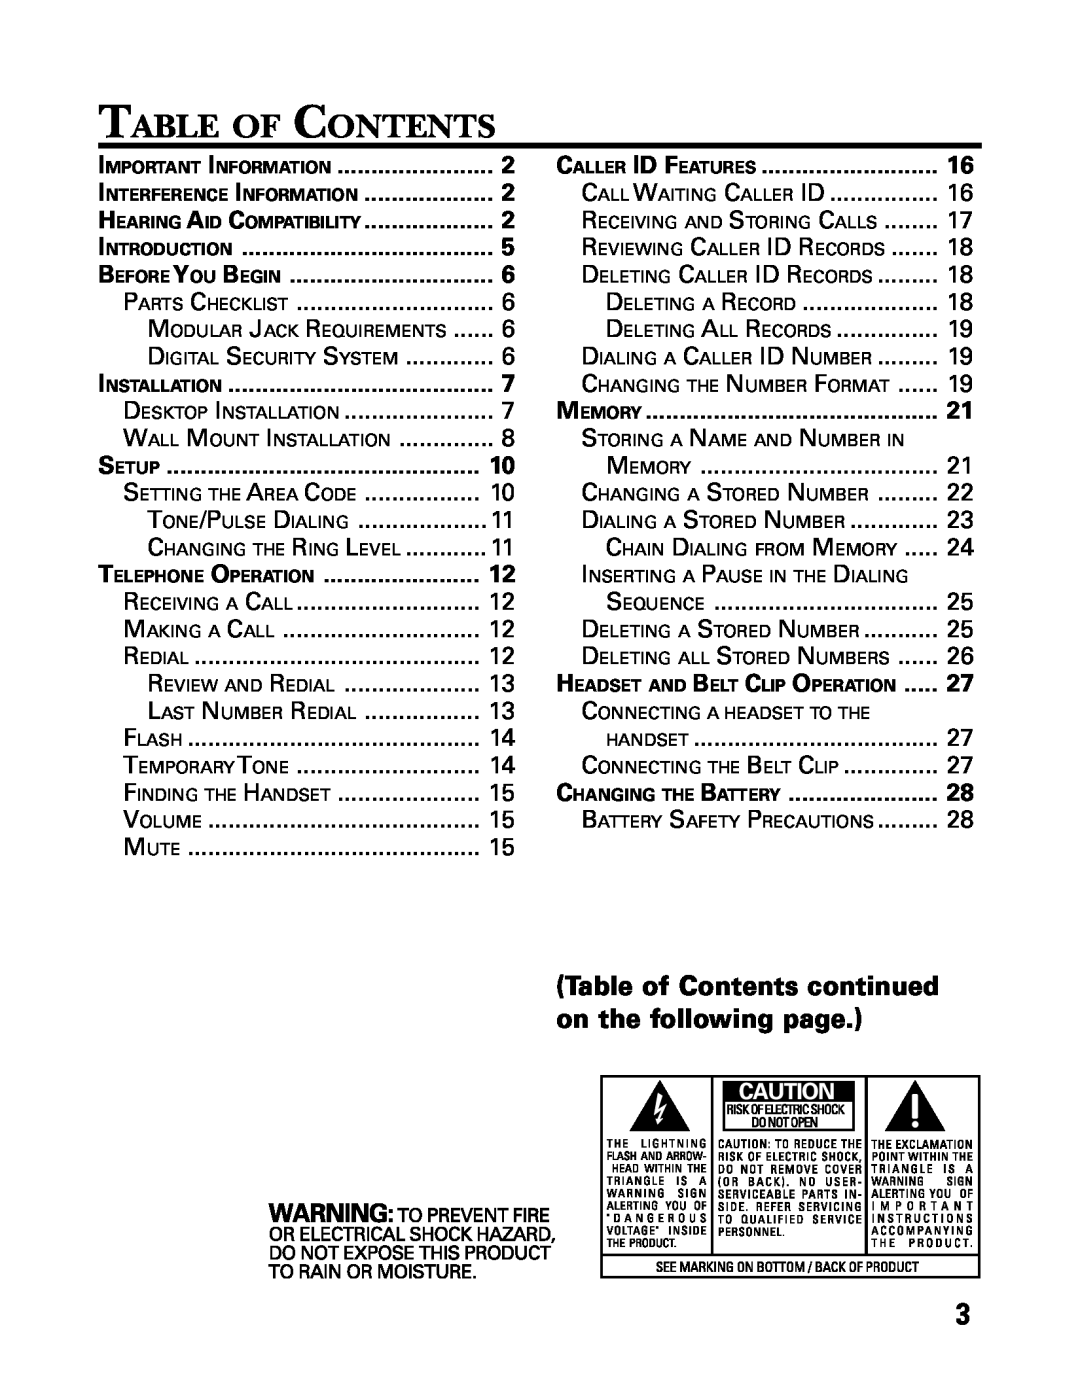 GE 27730 Table Of Contents, Table of Contents continued on the following page, Important Information, Caller Id Features 